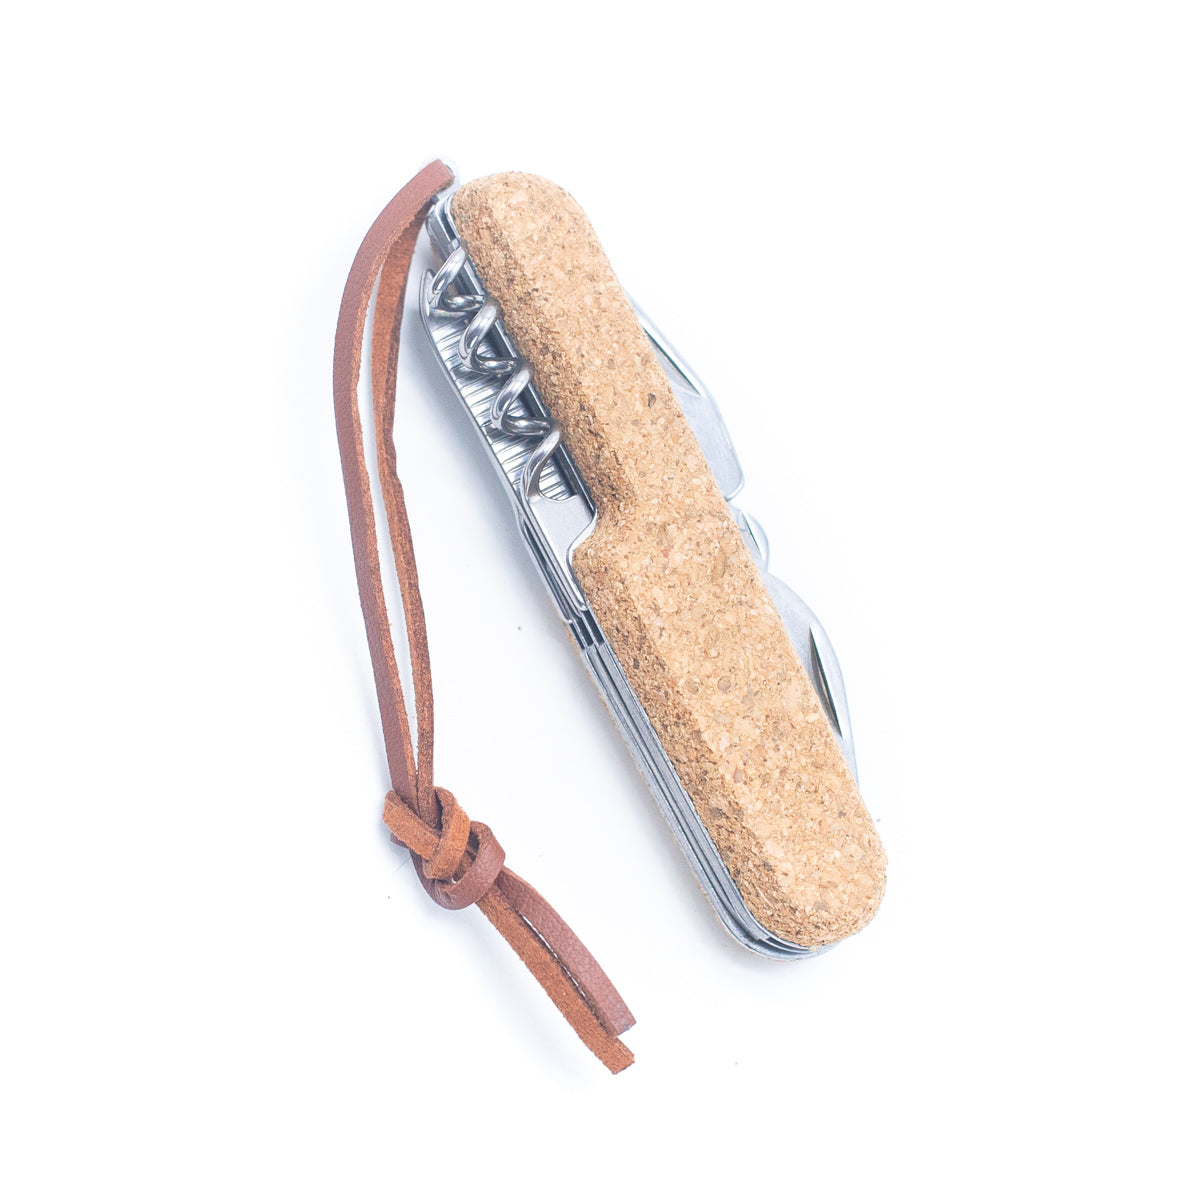 Multifunctional Pocket Tools w/ Cork Handle | THE CORK COLLECTION